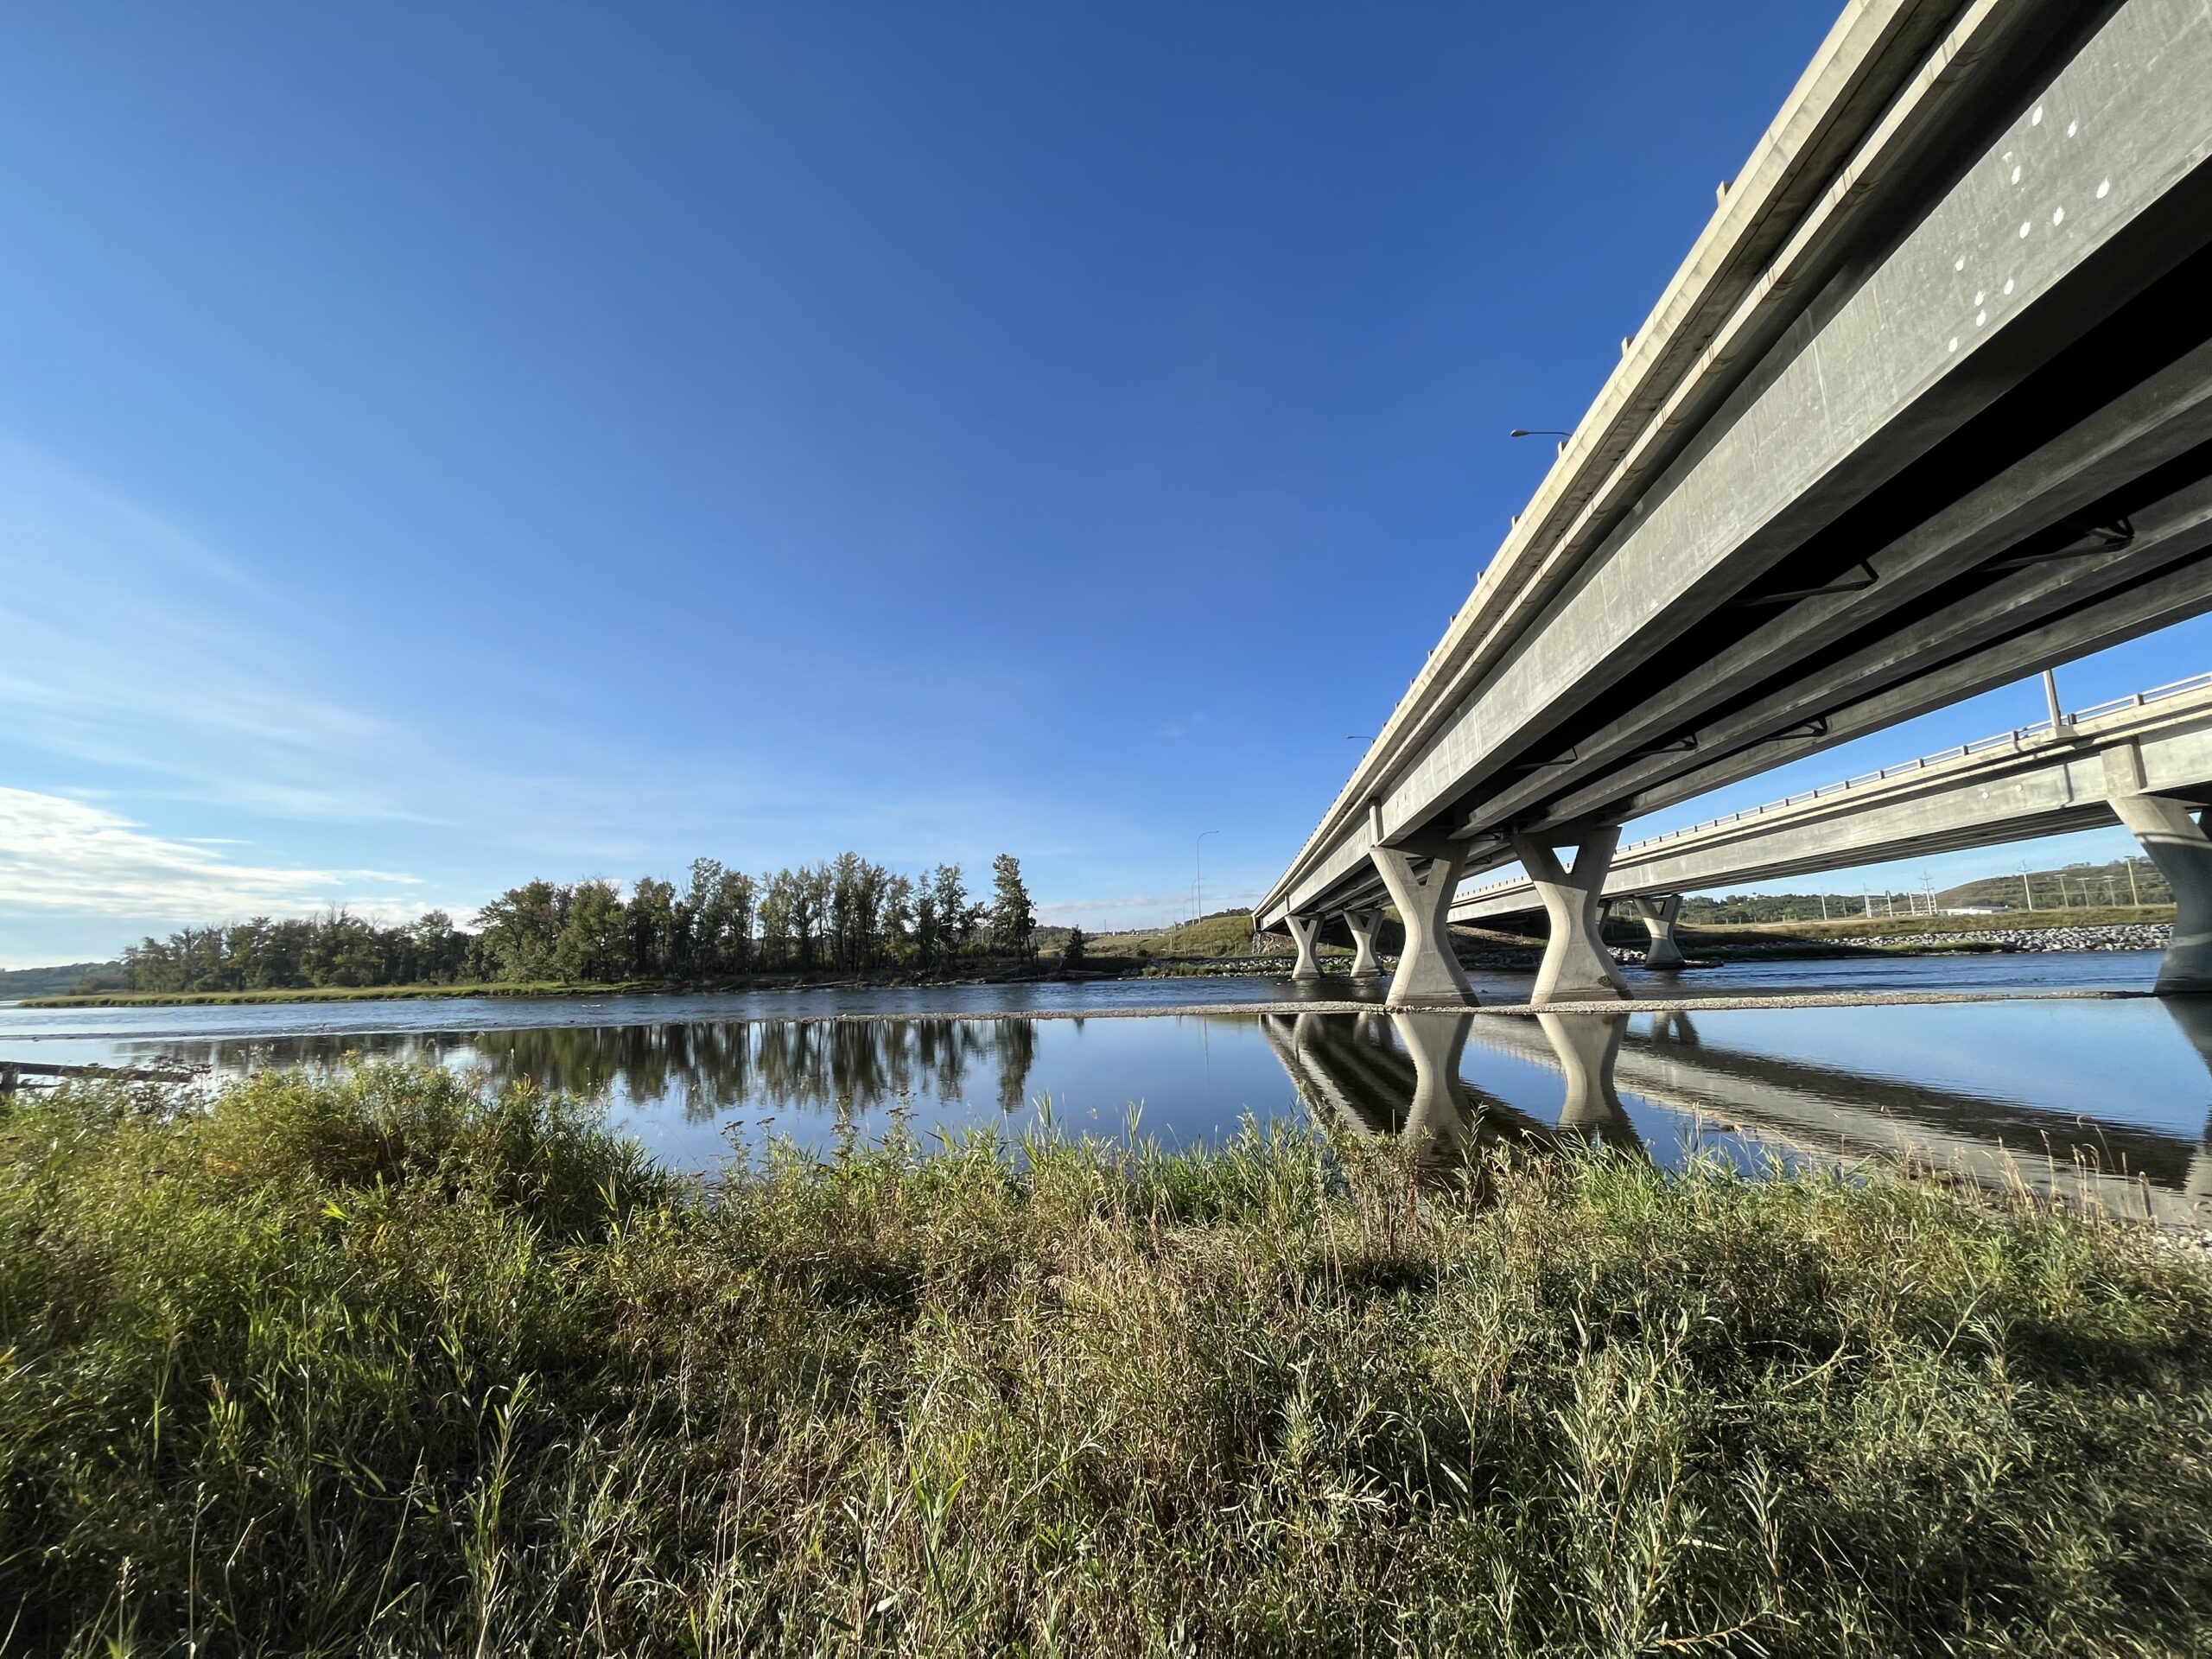 Deerfoot Trail passes over the Bow River in Calgary